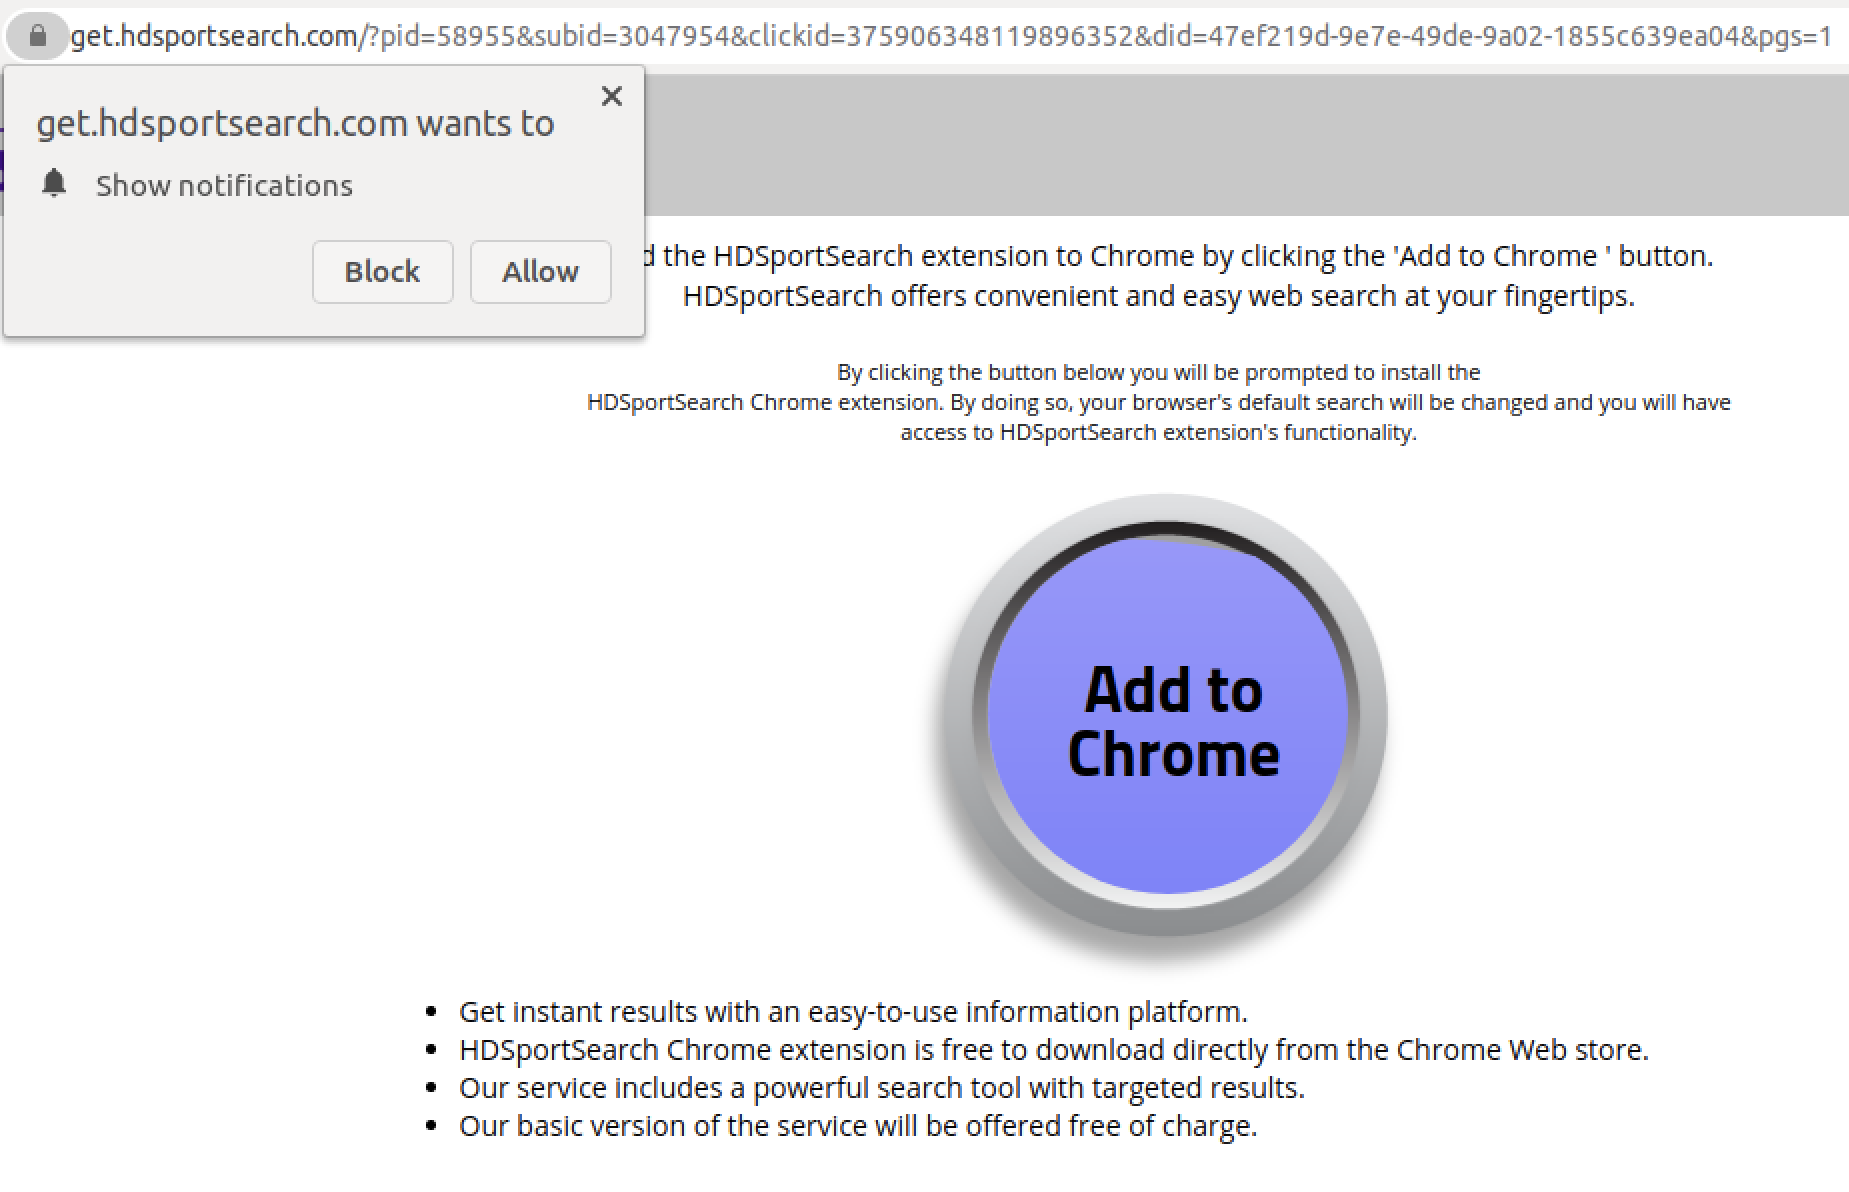 Face CAPTCHA phishing samples, one of the most popular phishing trends with PDF files that we observed, sometimes lead to web pages that seek to establish an ongoing relationship with the user. In the example shown here, the user is taken to a website that asks them to allow push notifications and download a Google Chrome extension. 